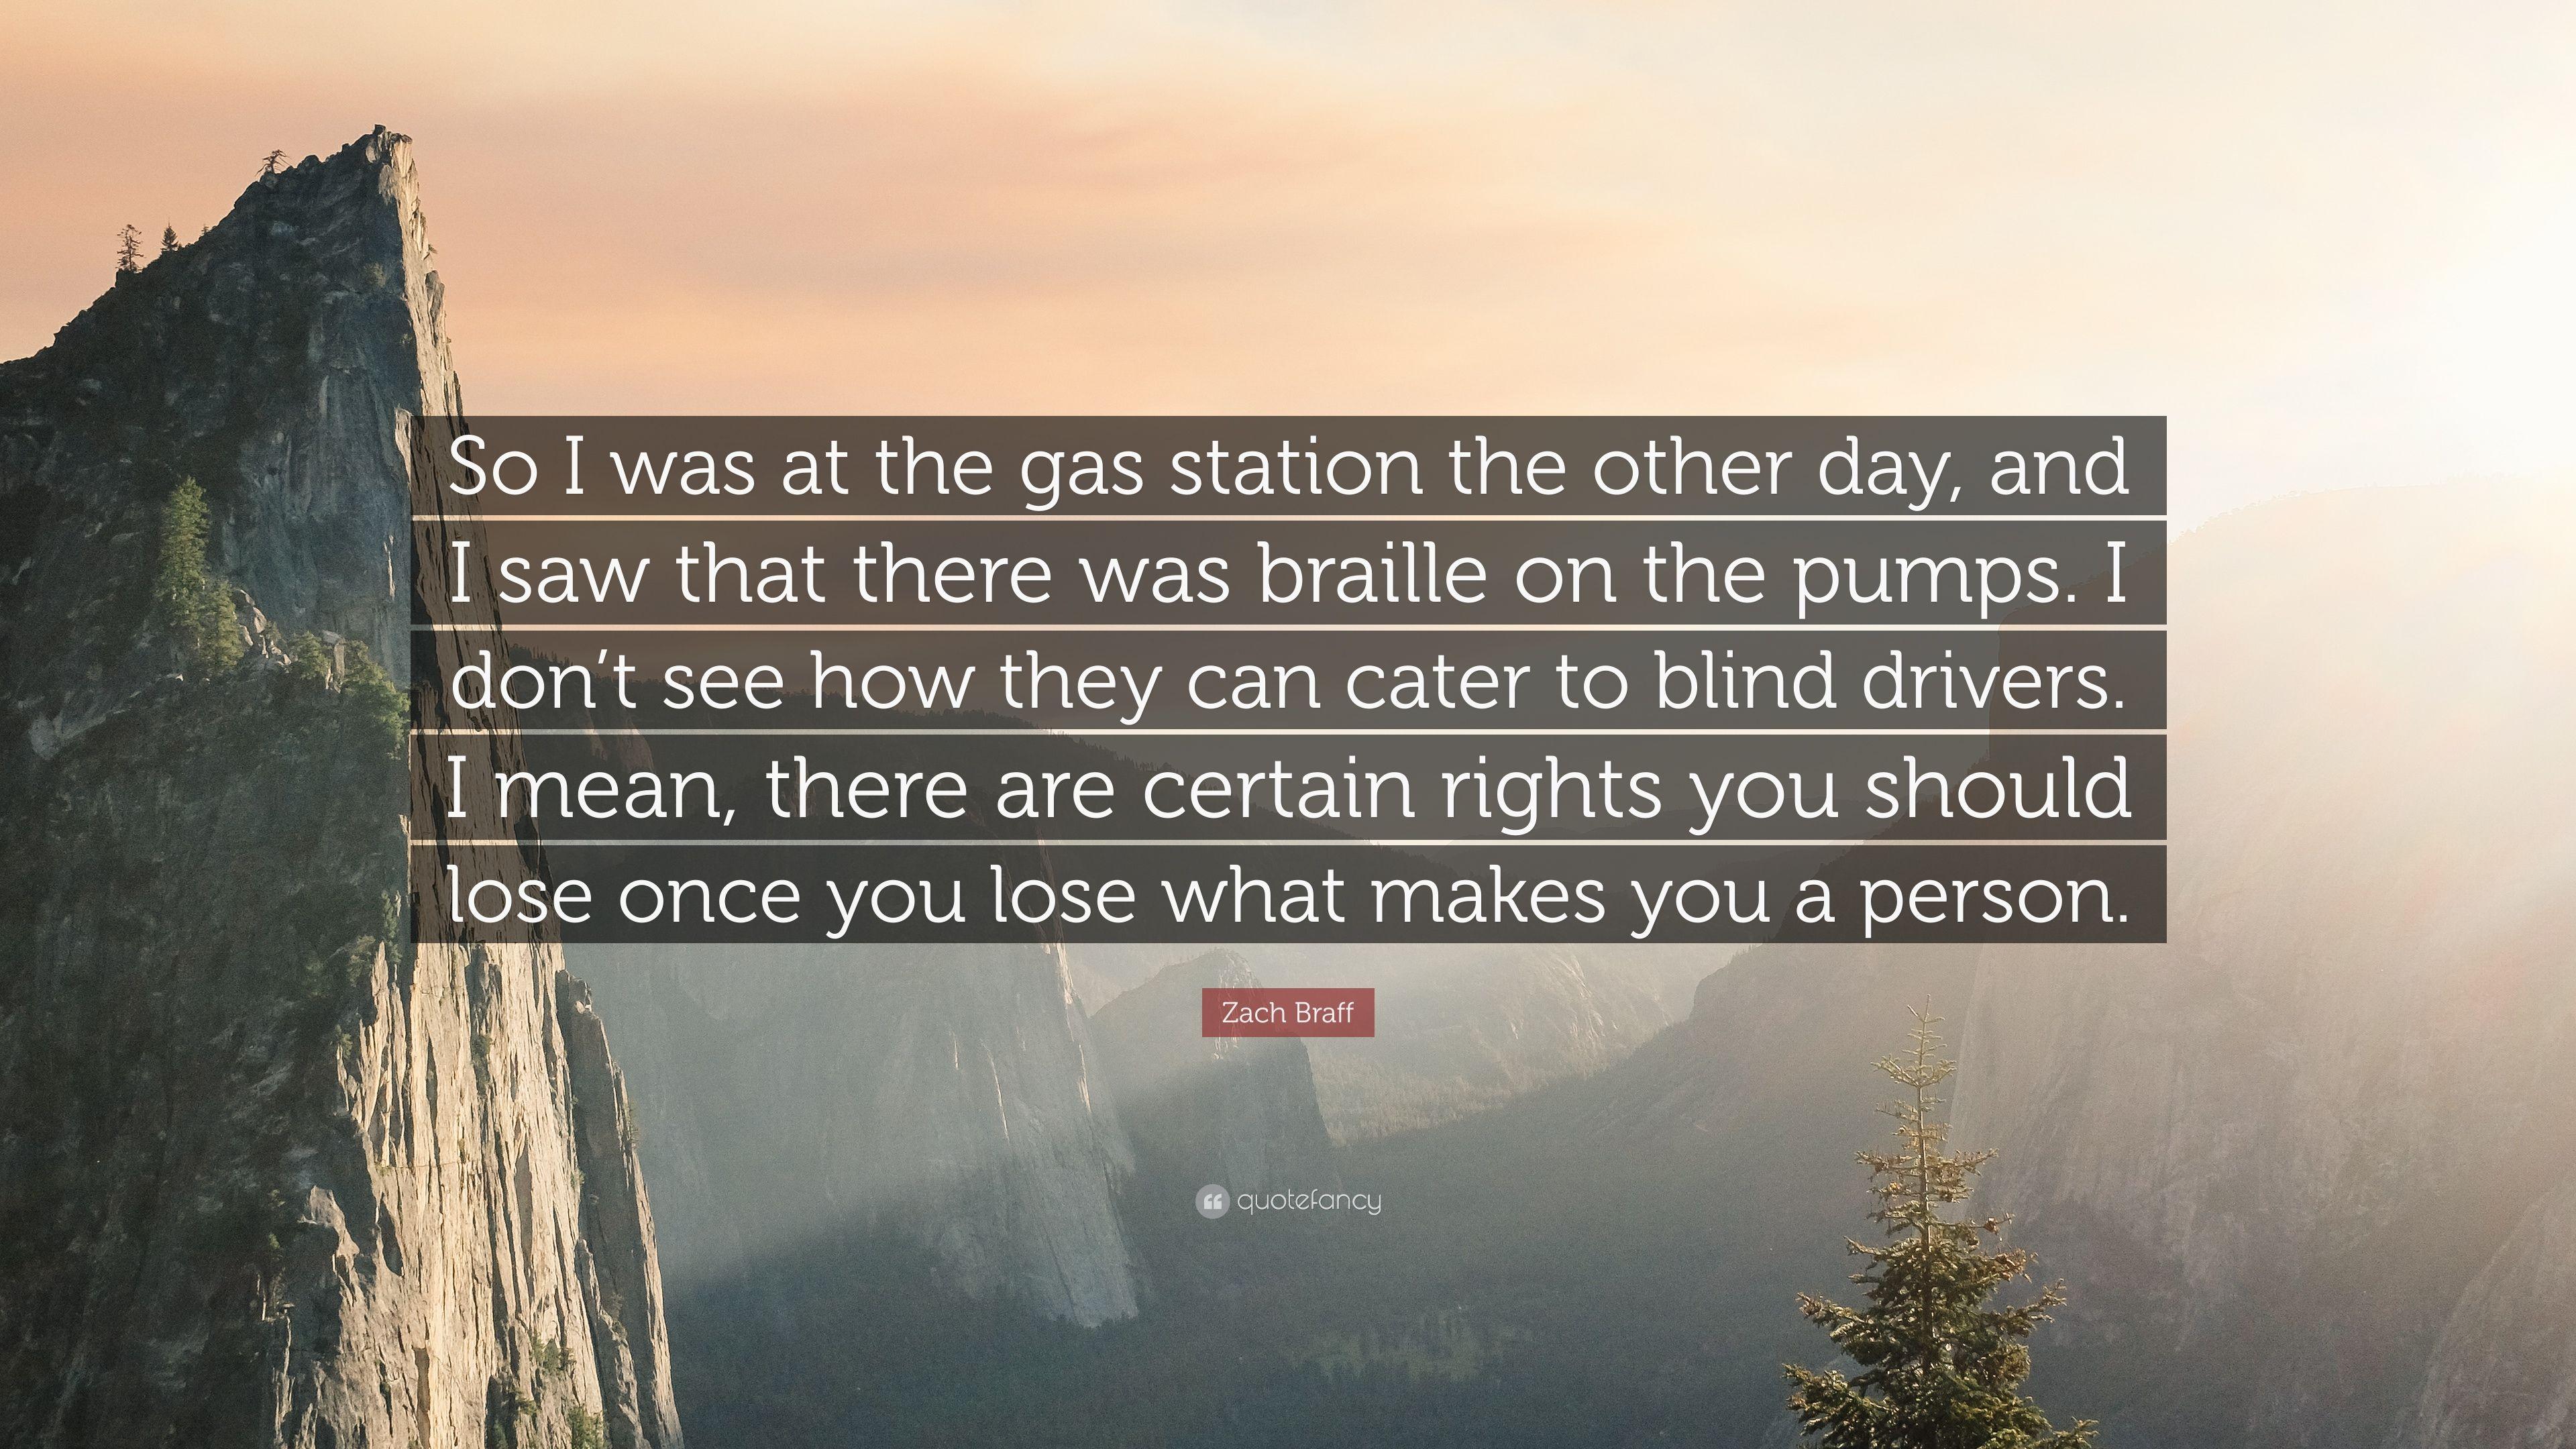 Zach Braff Quote: "So I was at the gas station the other day, and I.